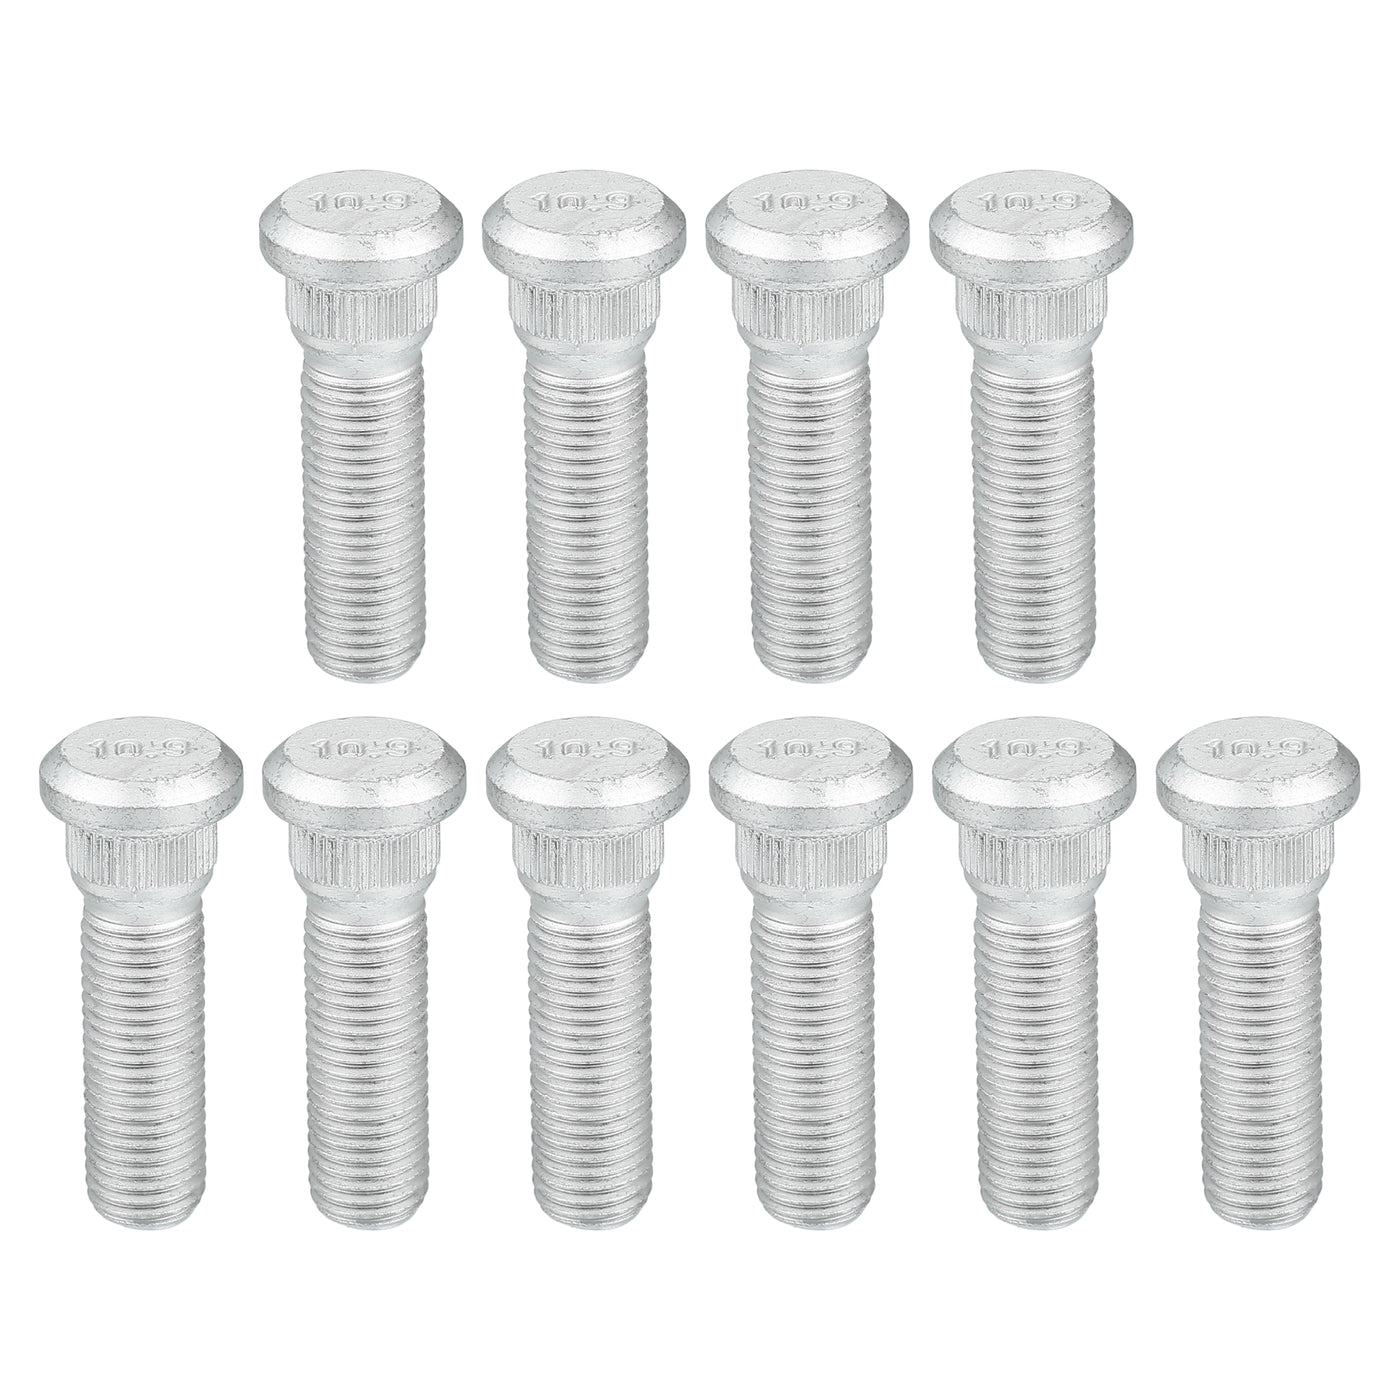 ACROPIX M12x1.5 Wheel Lug Bolts Nuts Hub Assembly Wheel Stud Fit for Toyota 4Runner 1986 - 2015 No.9094202049 - Pack of 10